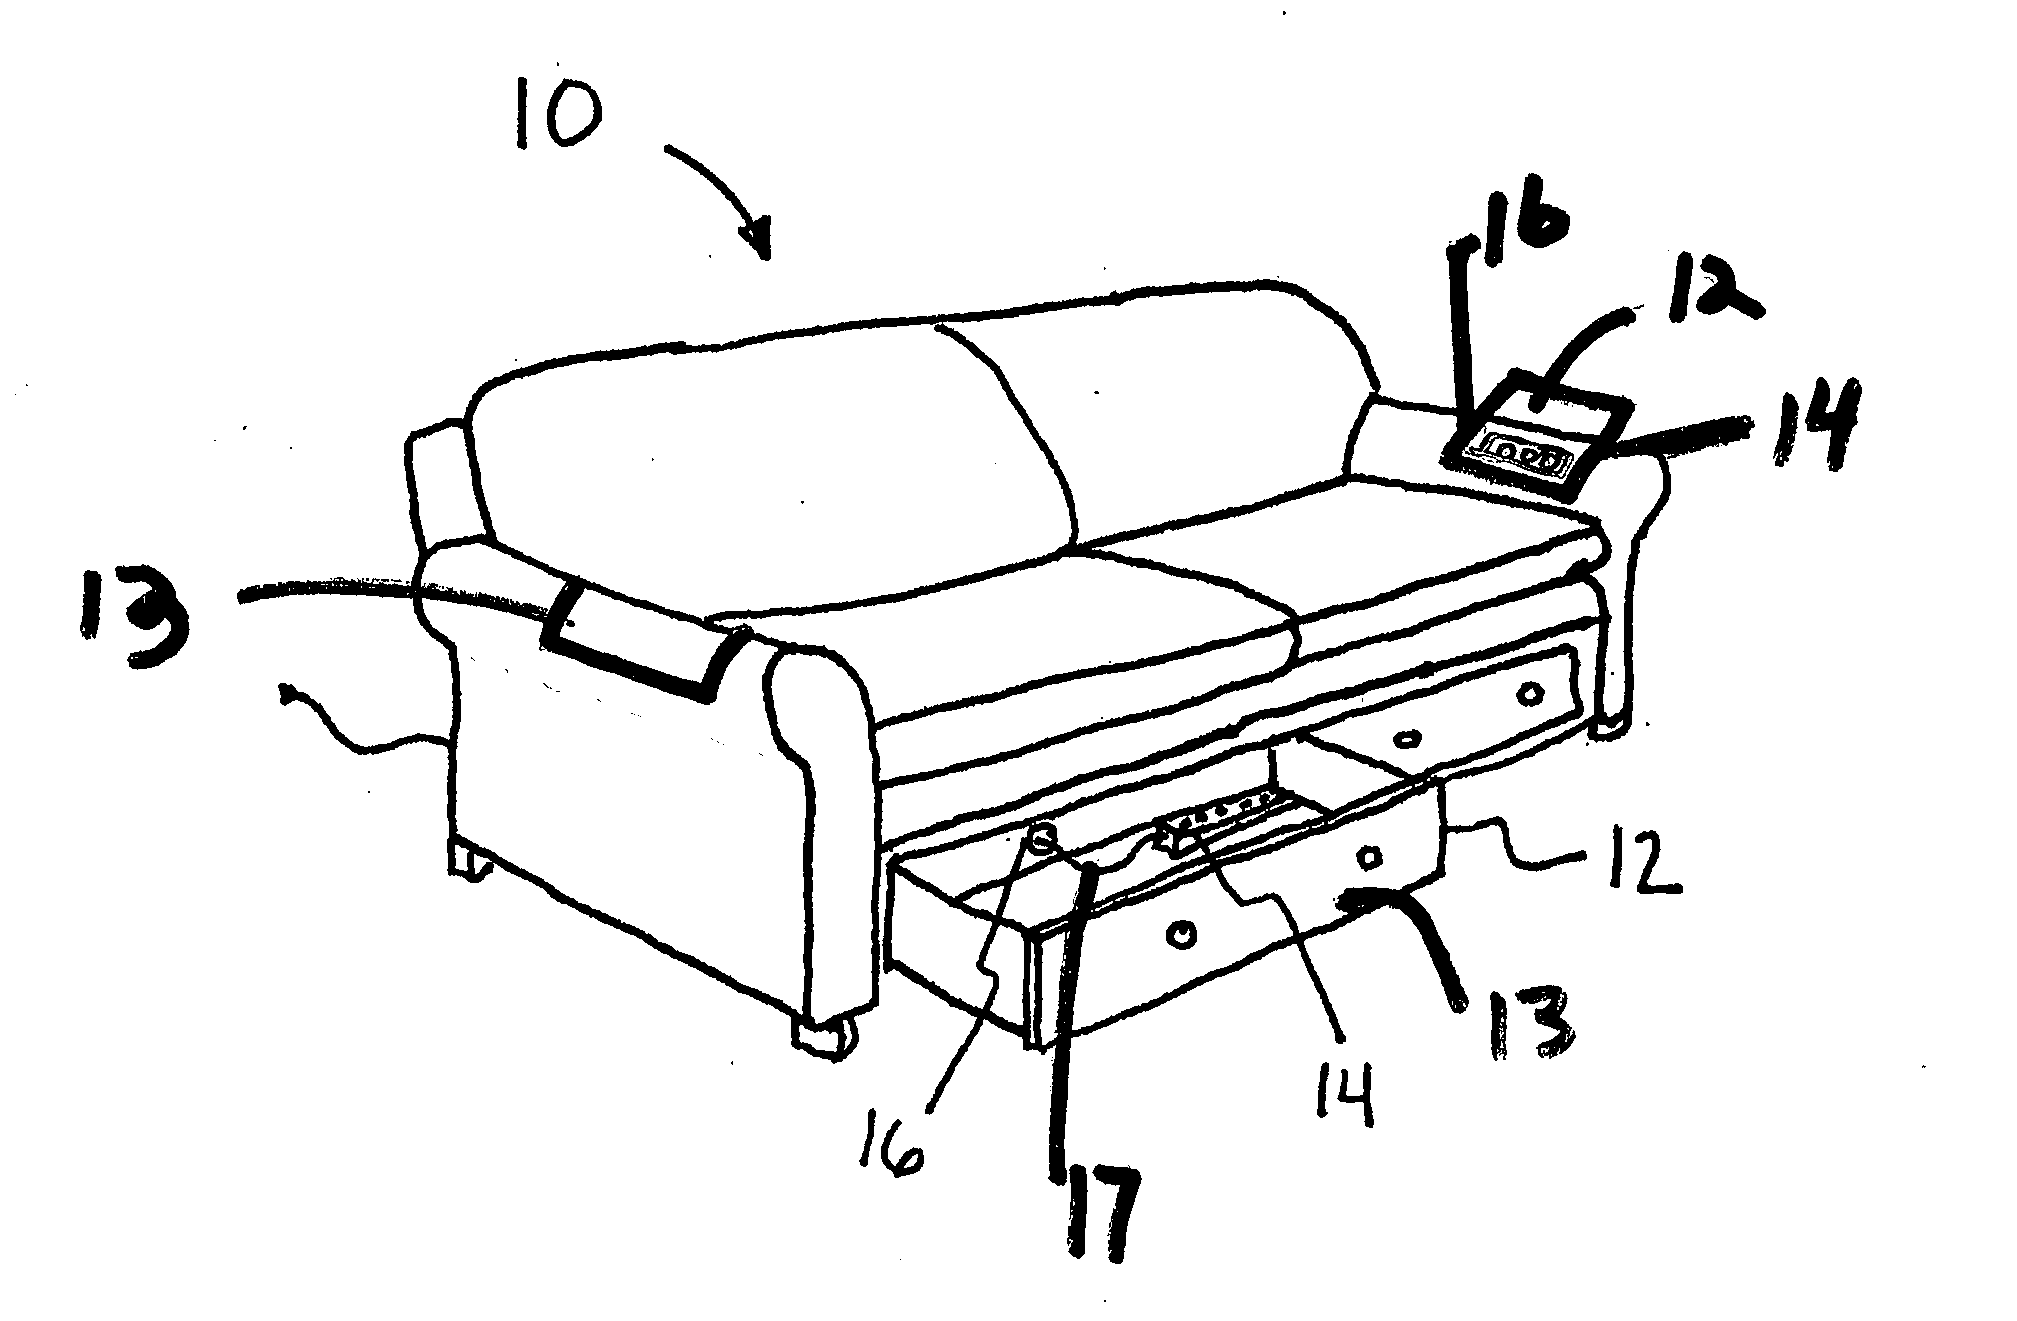 Seating furniture with built-in media dock